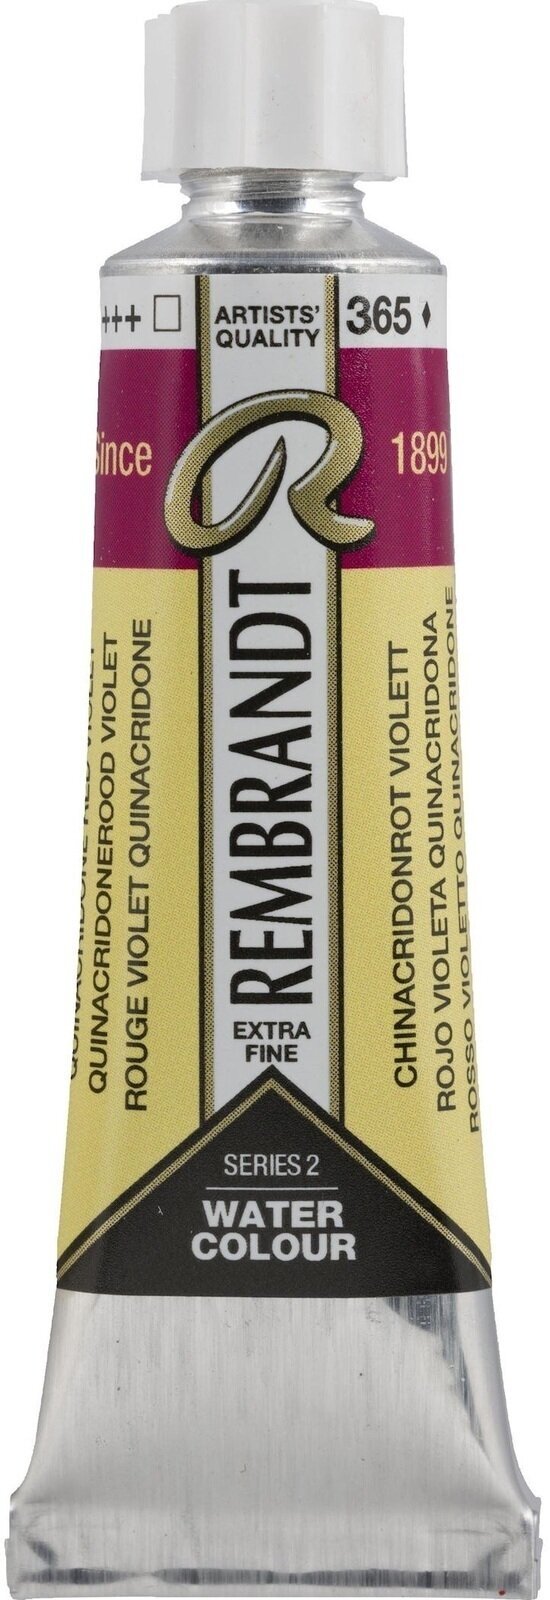 Nερομπογιά Rembrandt Watercolour Paint 10 ml Quinacridone Red Violet